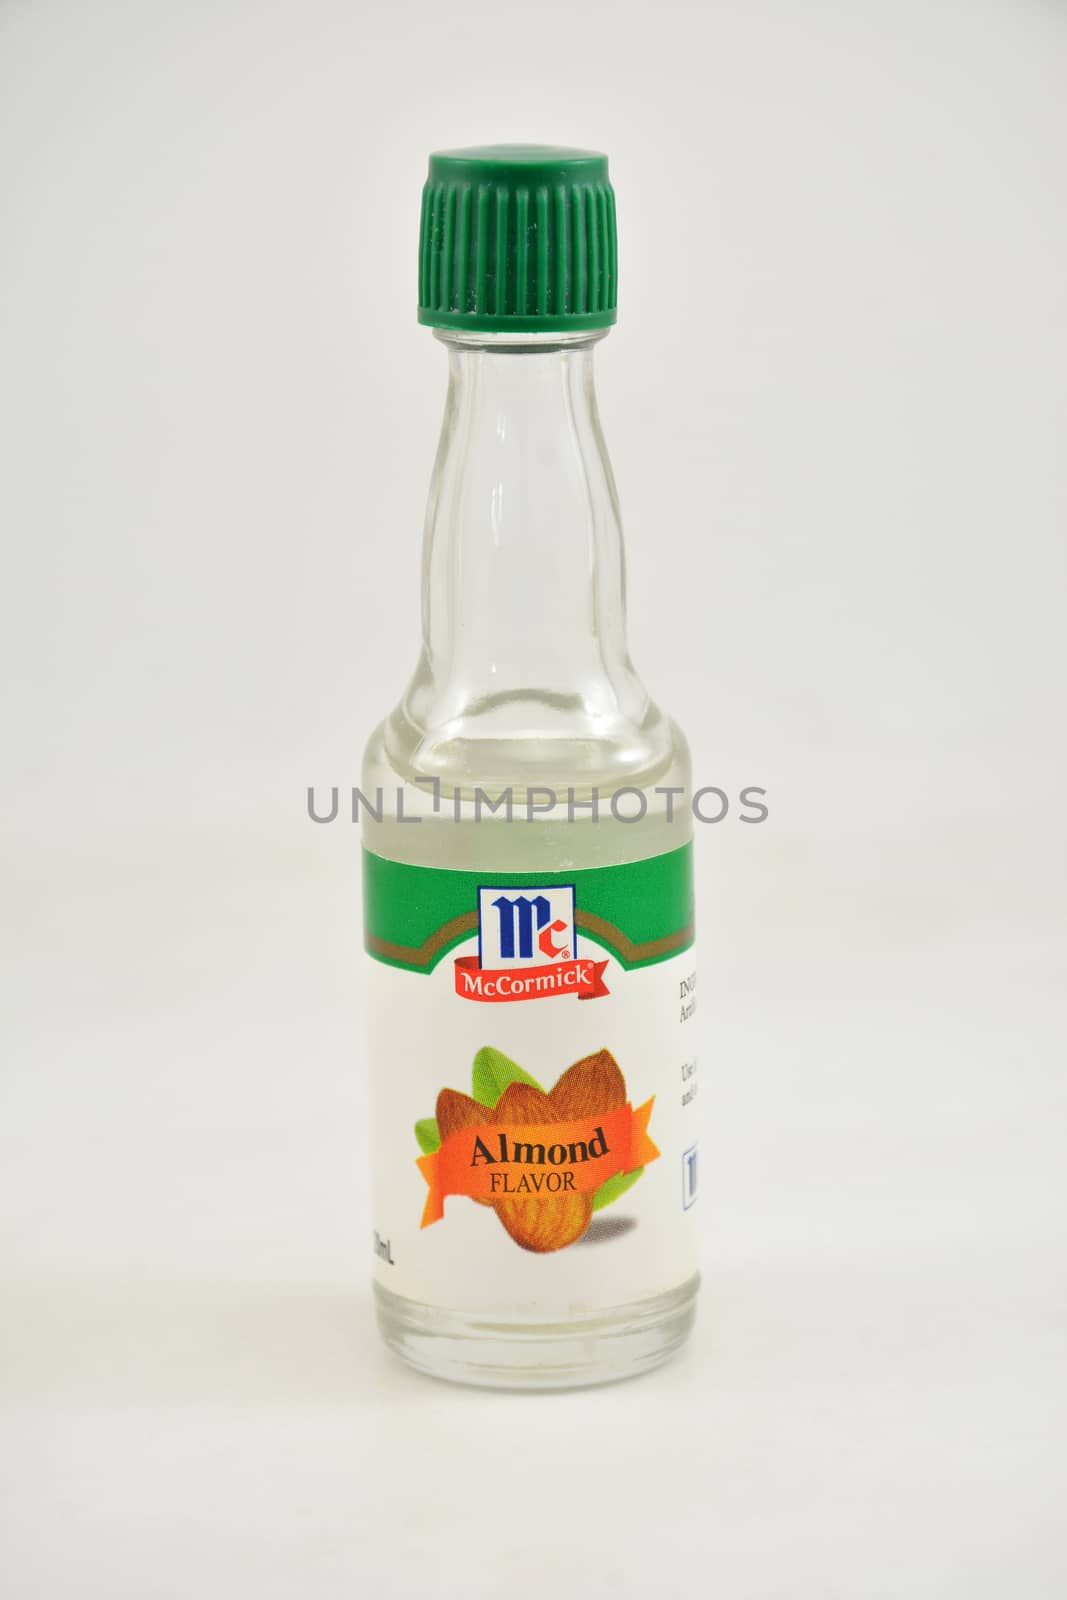 McCormick almond flavor extract in Manila, Philippines by imwaltersy